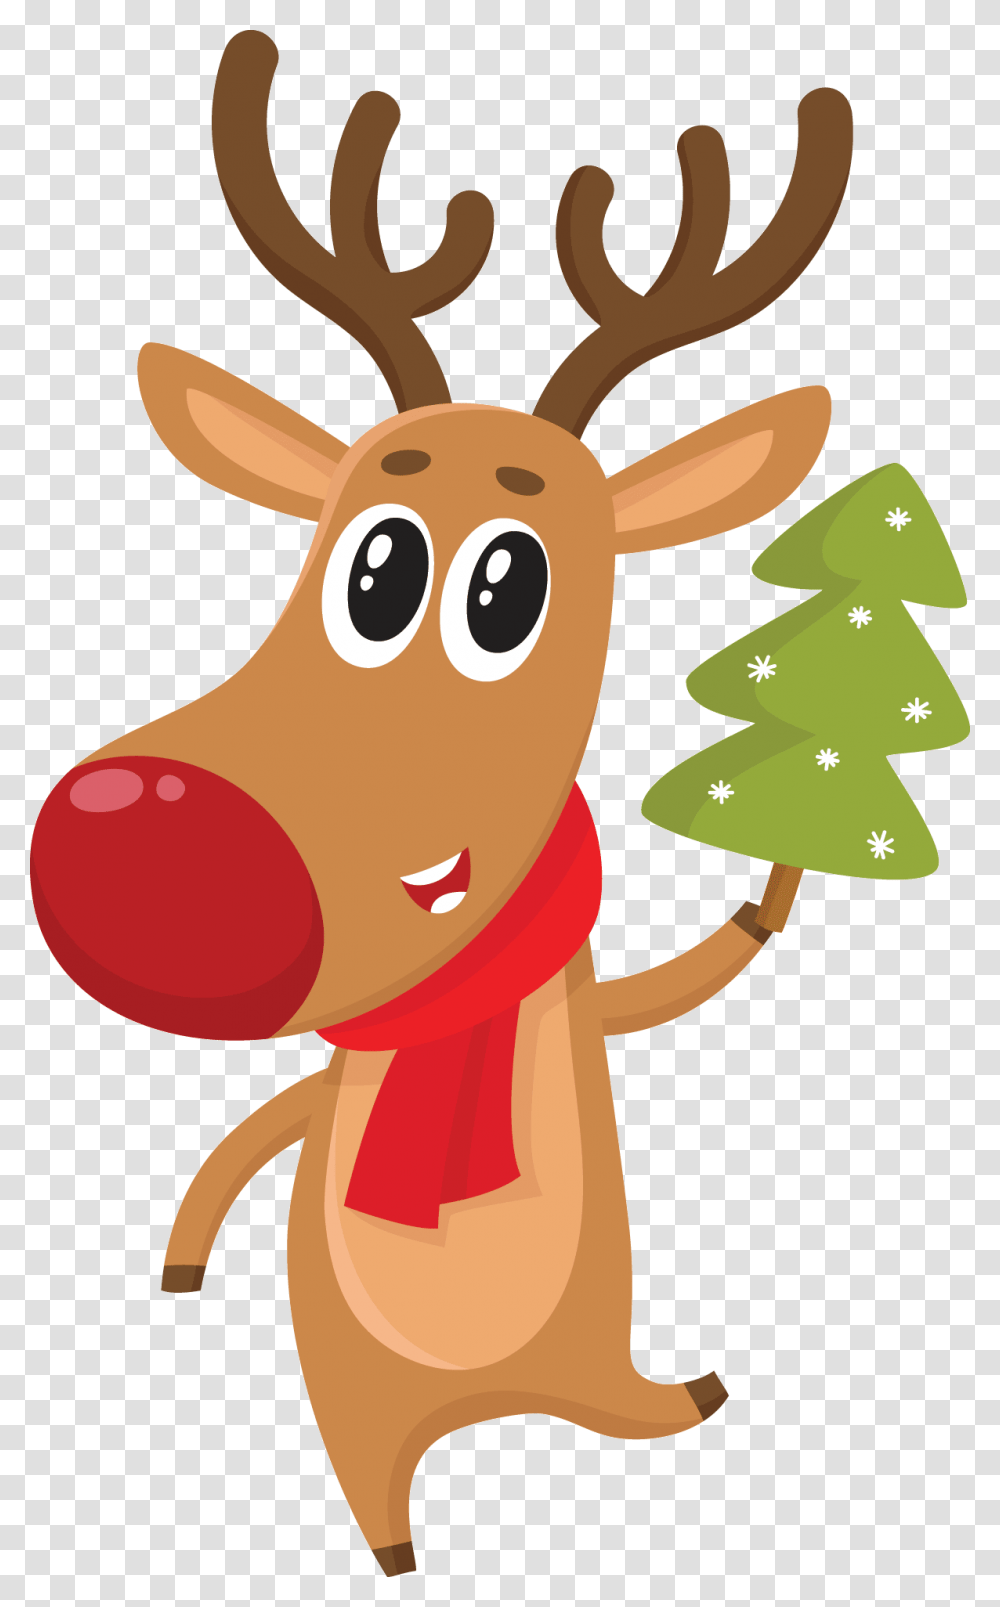 The Christmas Tree That Came To Life Cartoon Images Of Christmas Reindeer, Wildlife, Mammal, Animal Transparent Png